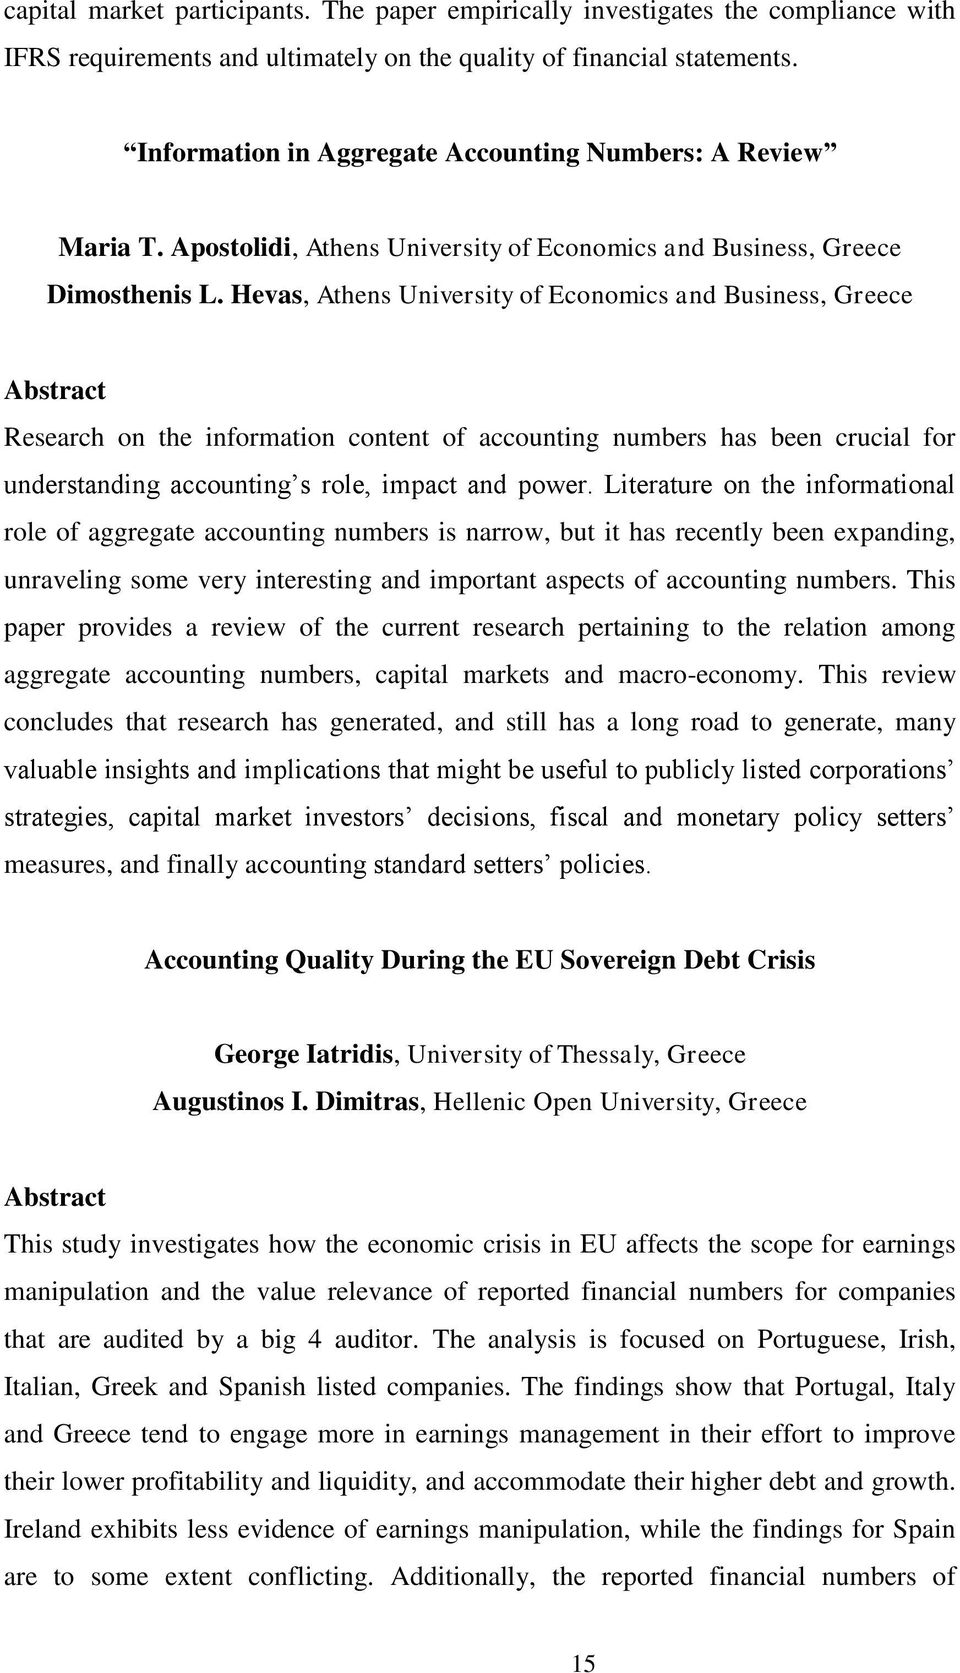 Hevas, Athens University of Economics and Business, Greece Research on the information content of accounting numbers has been crucial for understanding accounting s role, impact and power.